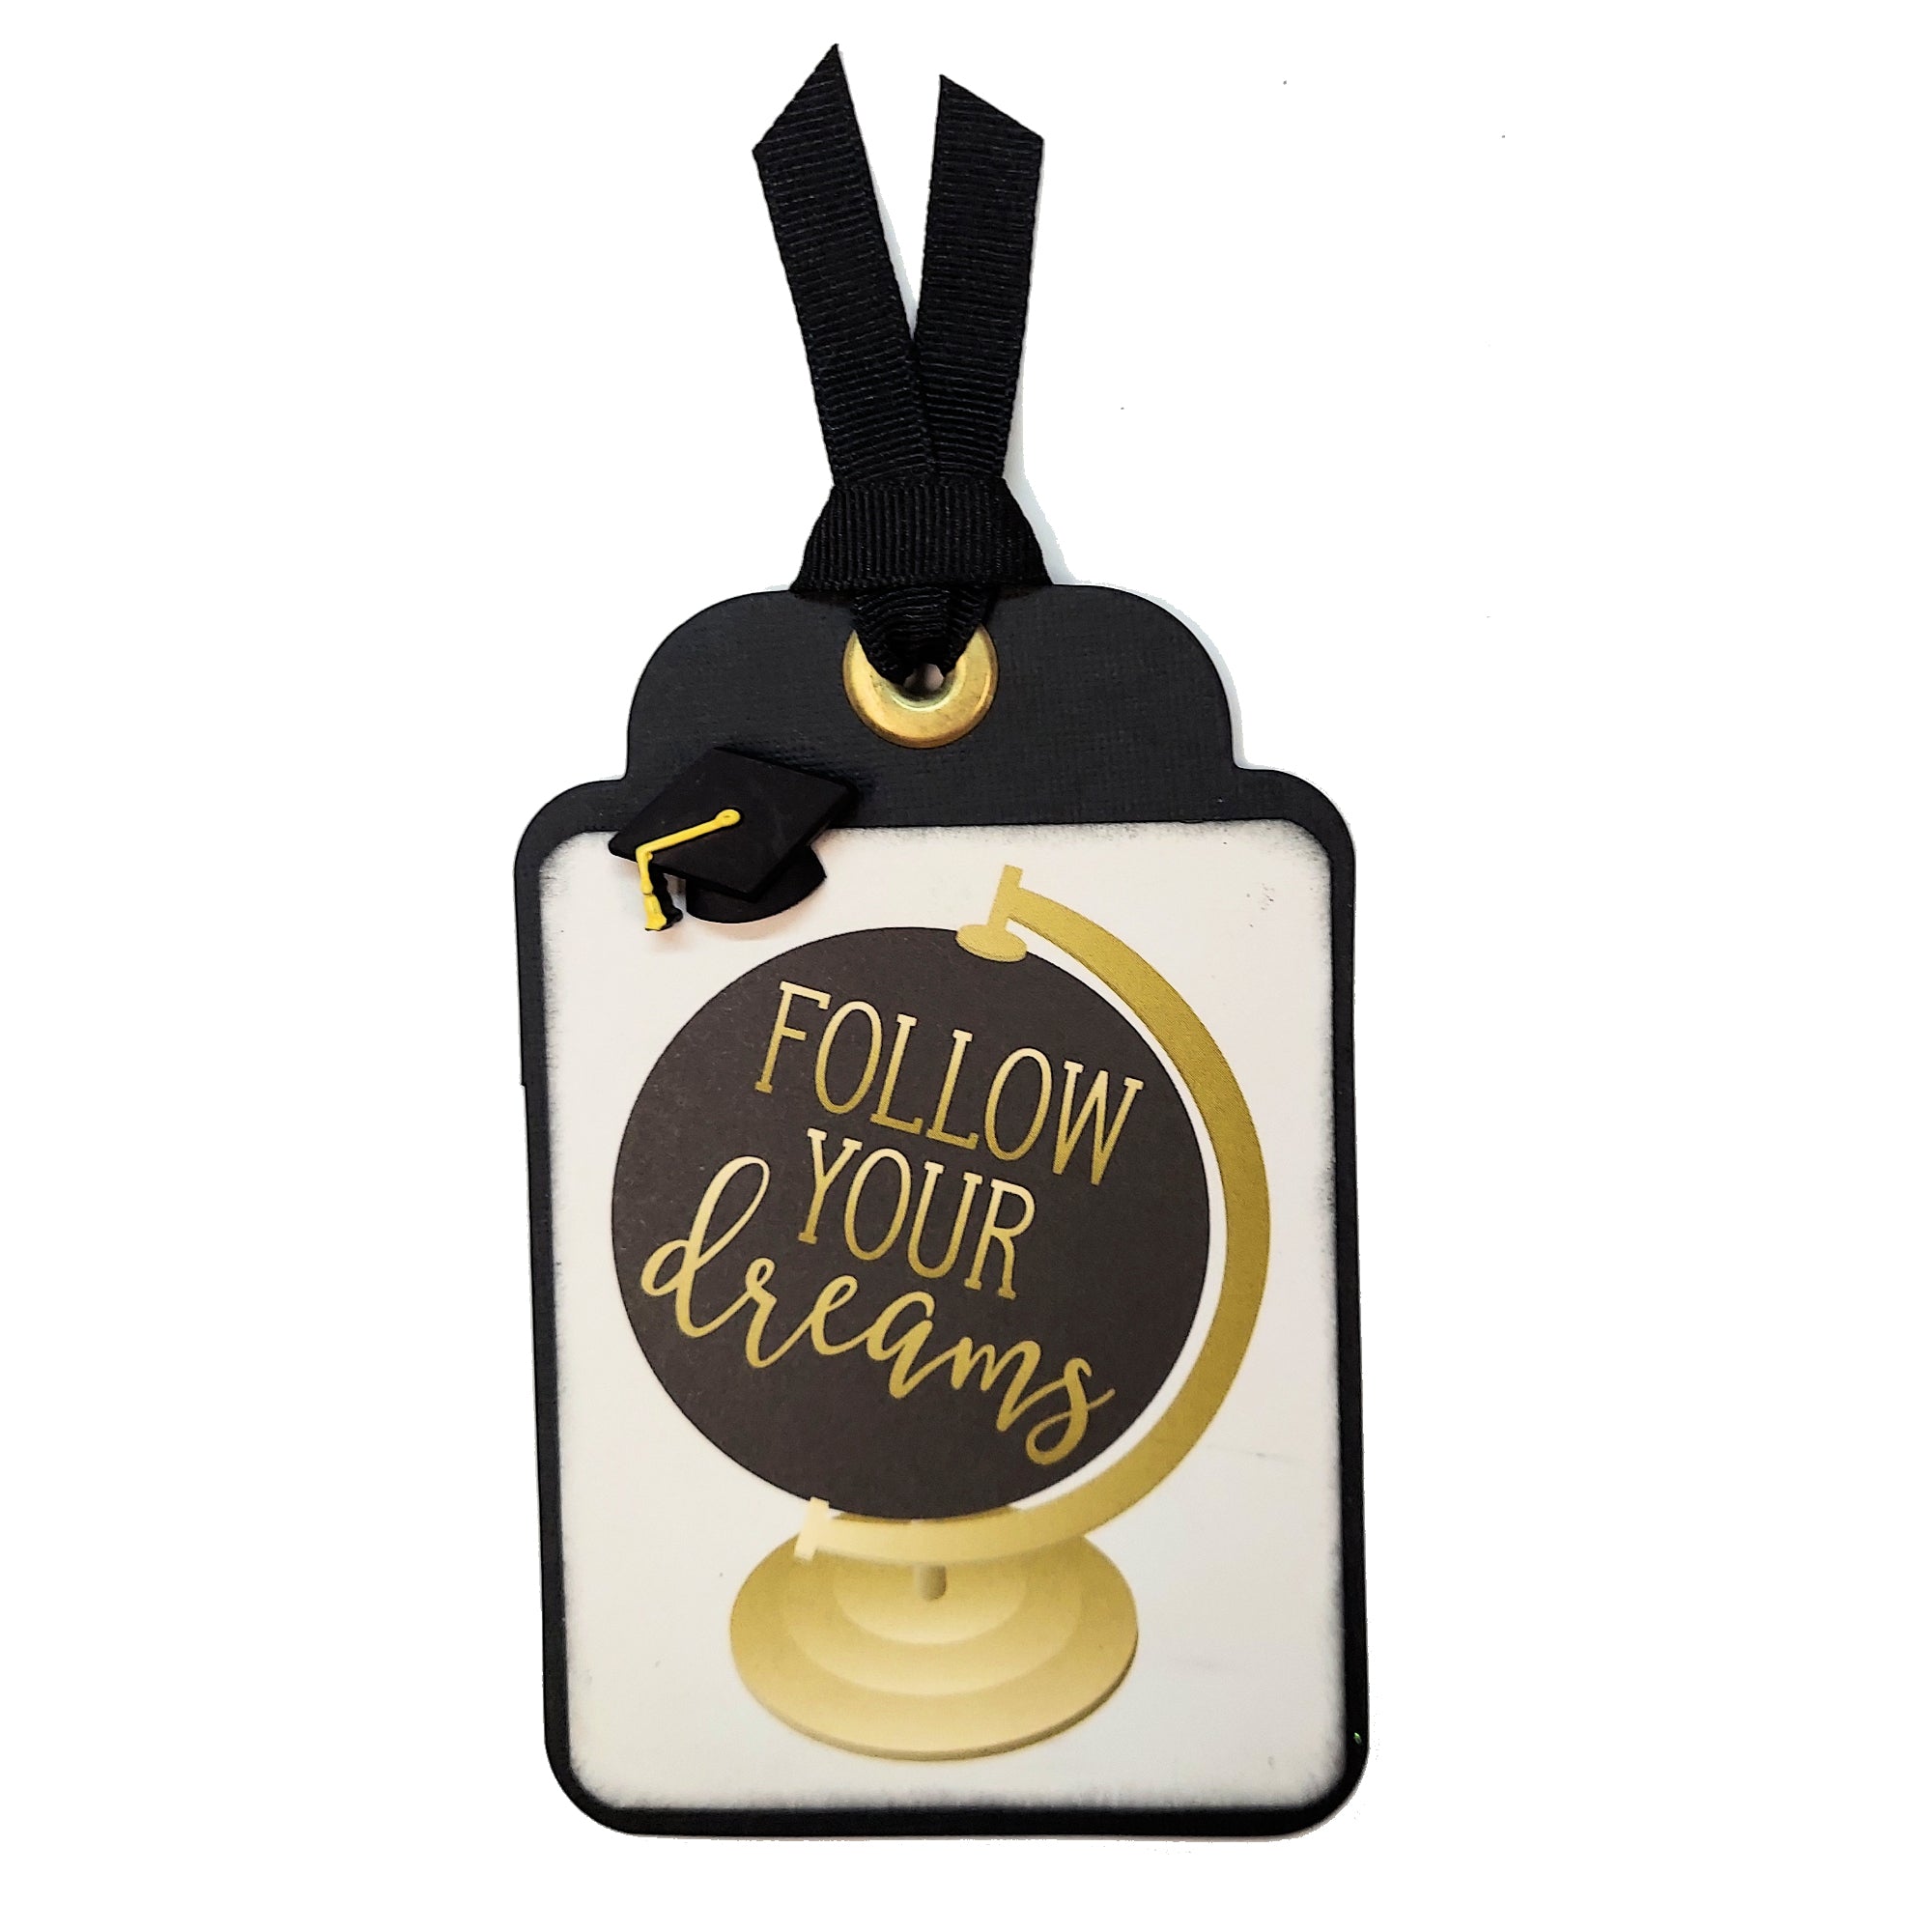 Follow Your Dreams Tag 3 x 5 Coordinating Scrapbook Tag Embellishment by SSC Designs